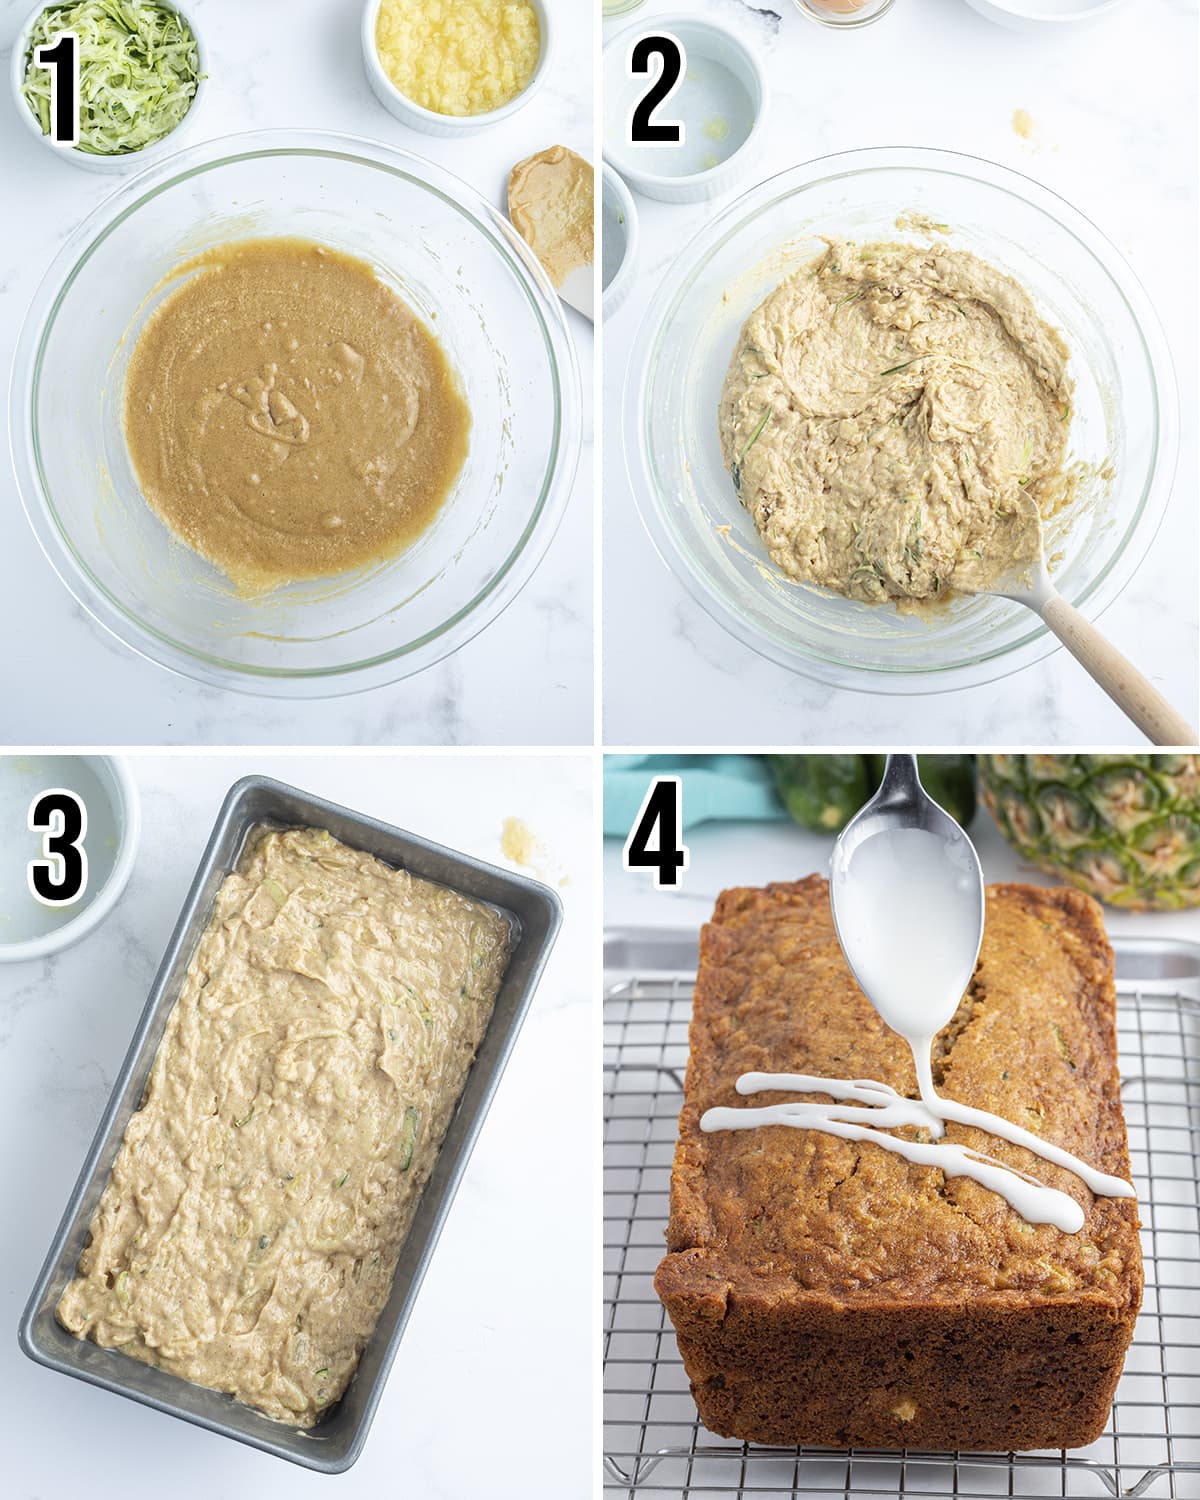 A collage of 4 photos showing how to make pineapple zucchini bread.